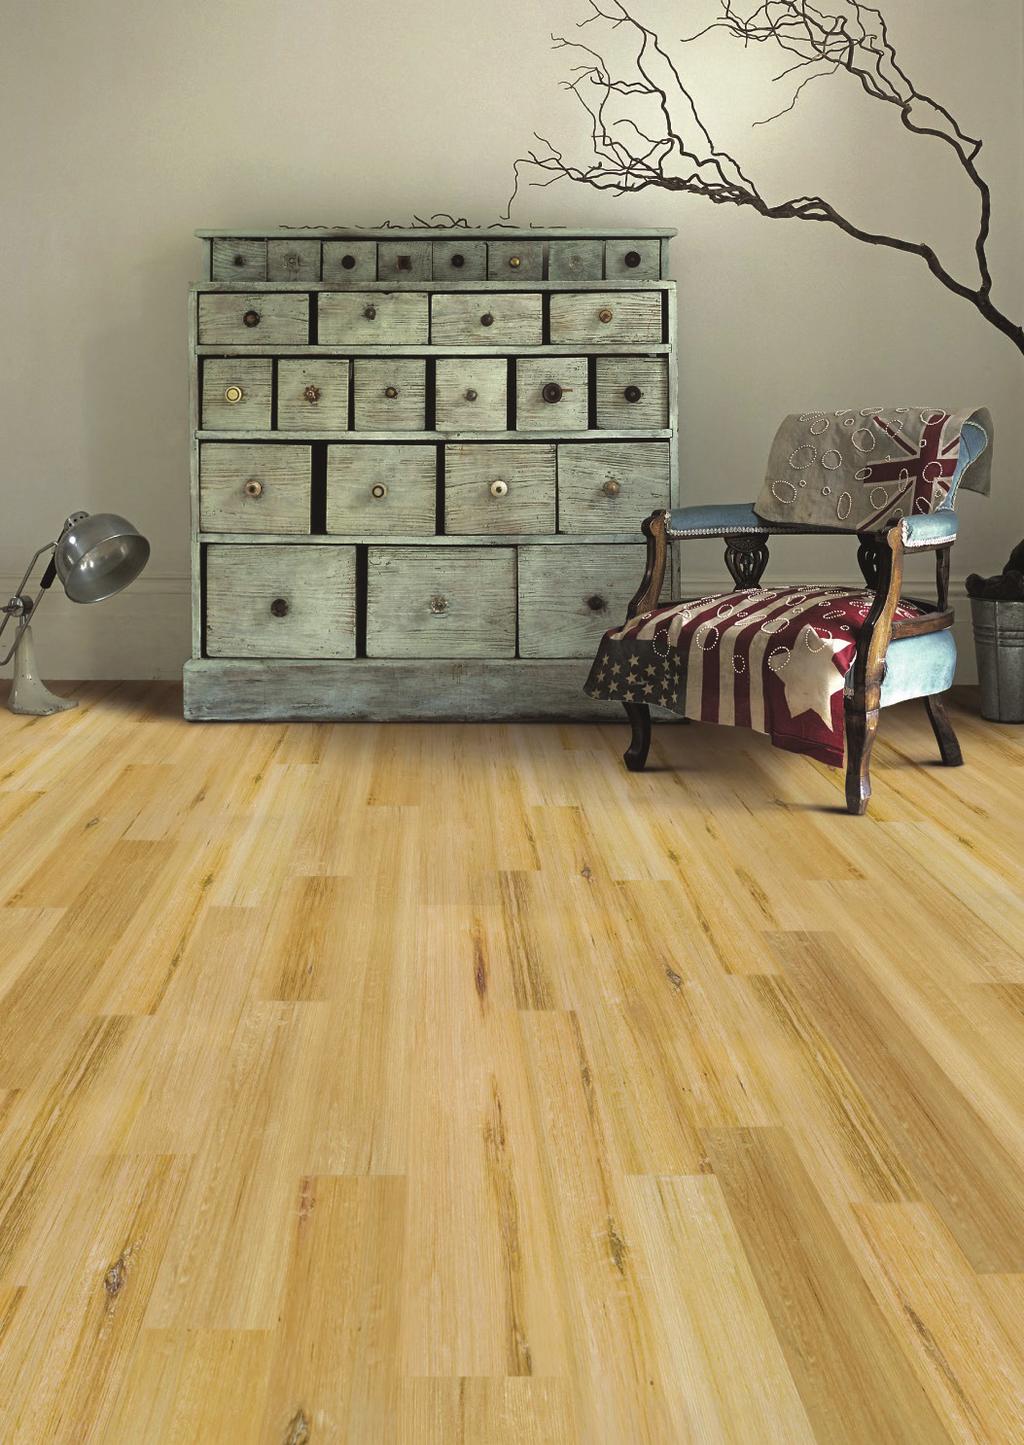 Loose LAY Serfloor Loose Lay Vinyl Planks are a premium and elegant option with a realistic wood look design that is a perfect solution for your flooring choice.